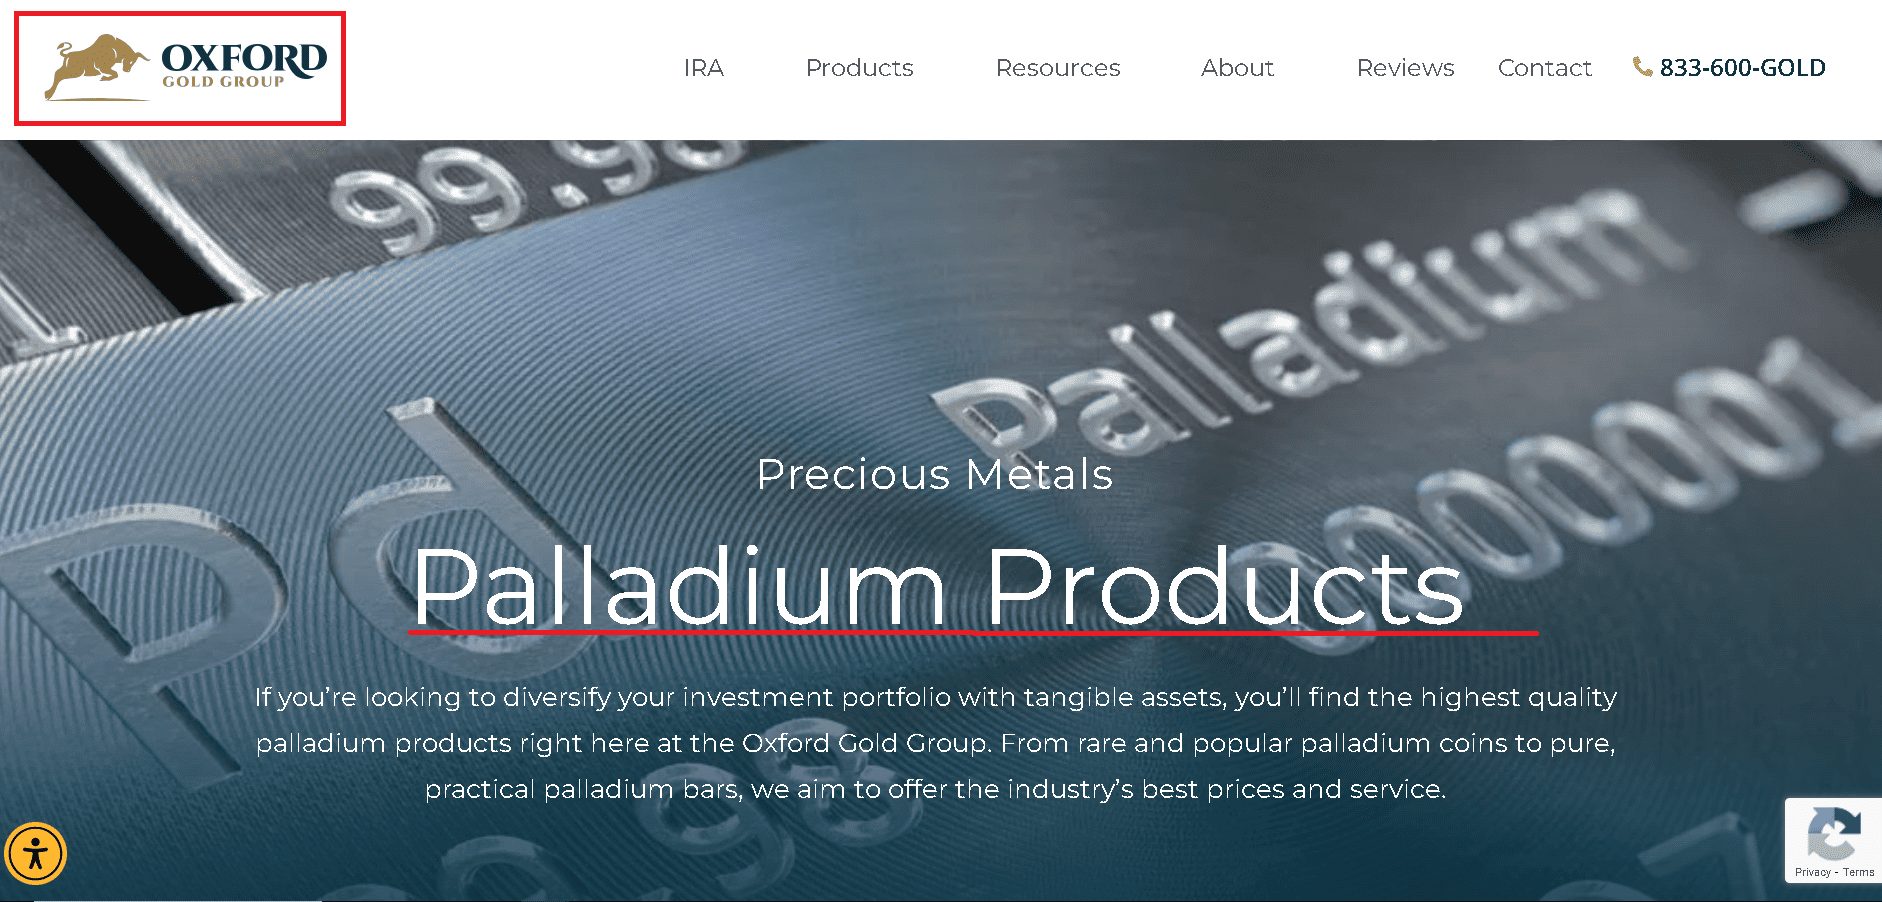 Oxford Gold Group sell palladium coins and bars